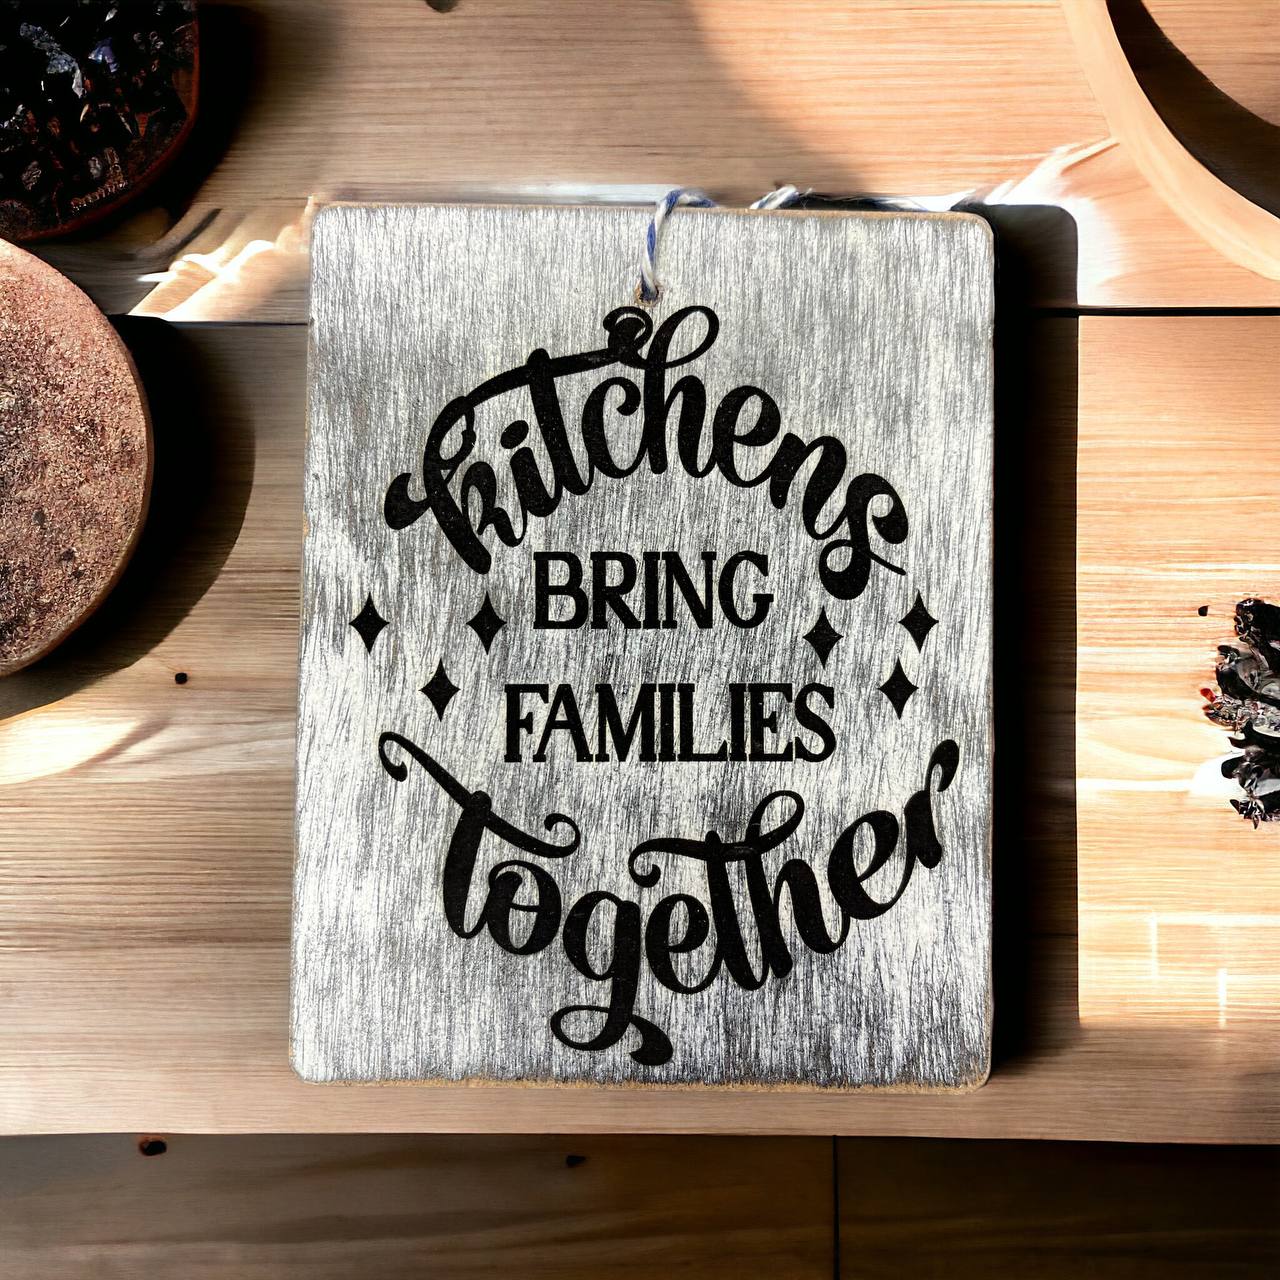 Kitchens Bring Families Together Decor